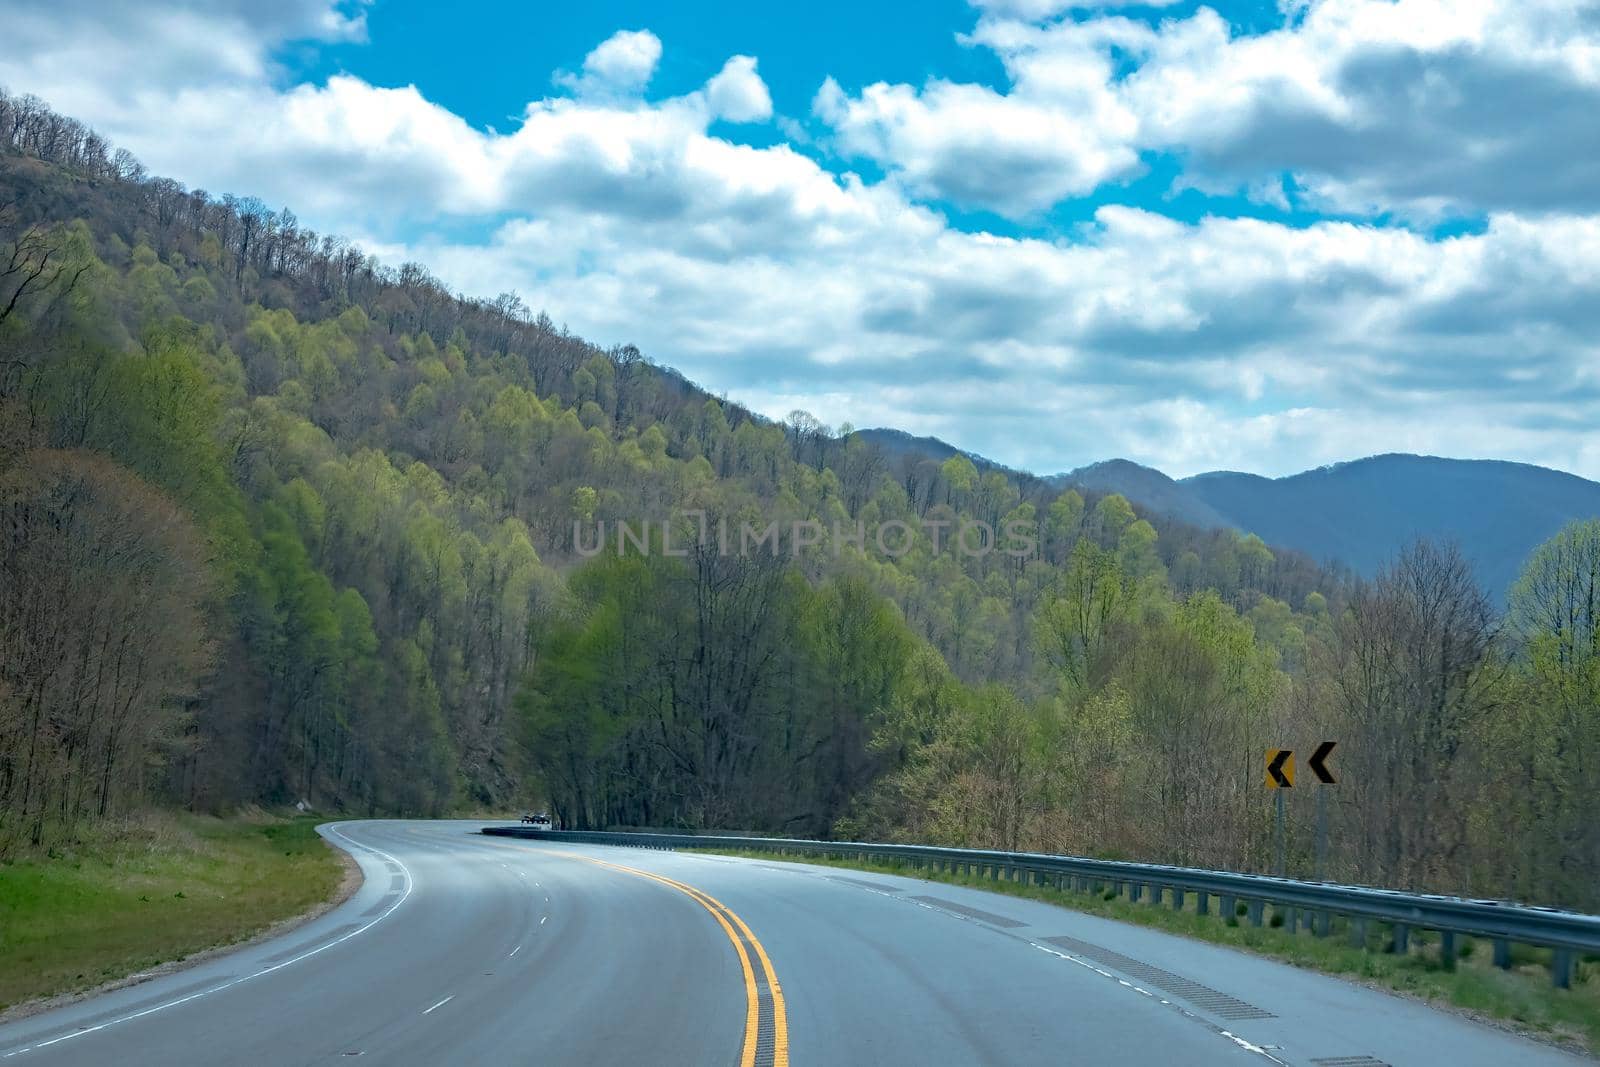 Landscape scenic views at pisgah national forest by digidreamgrafix